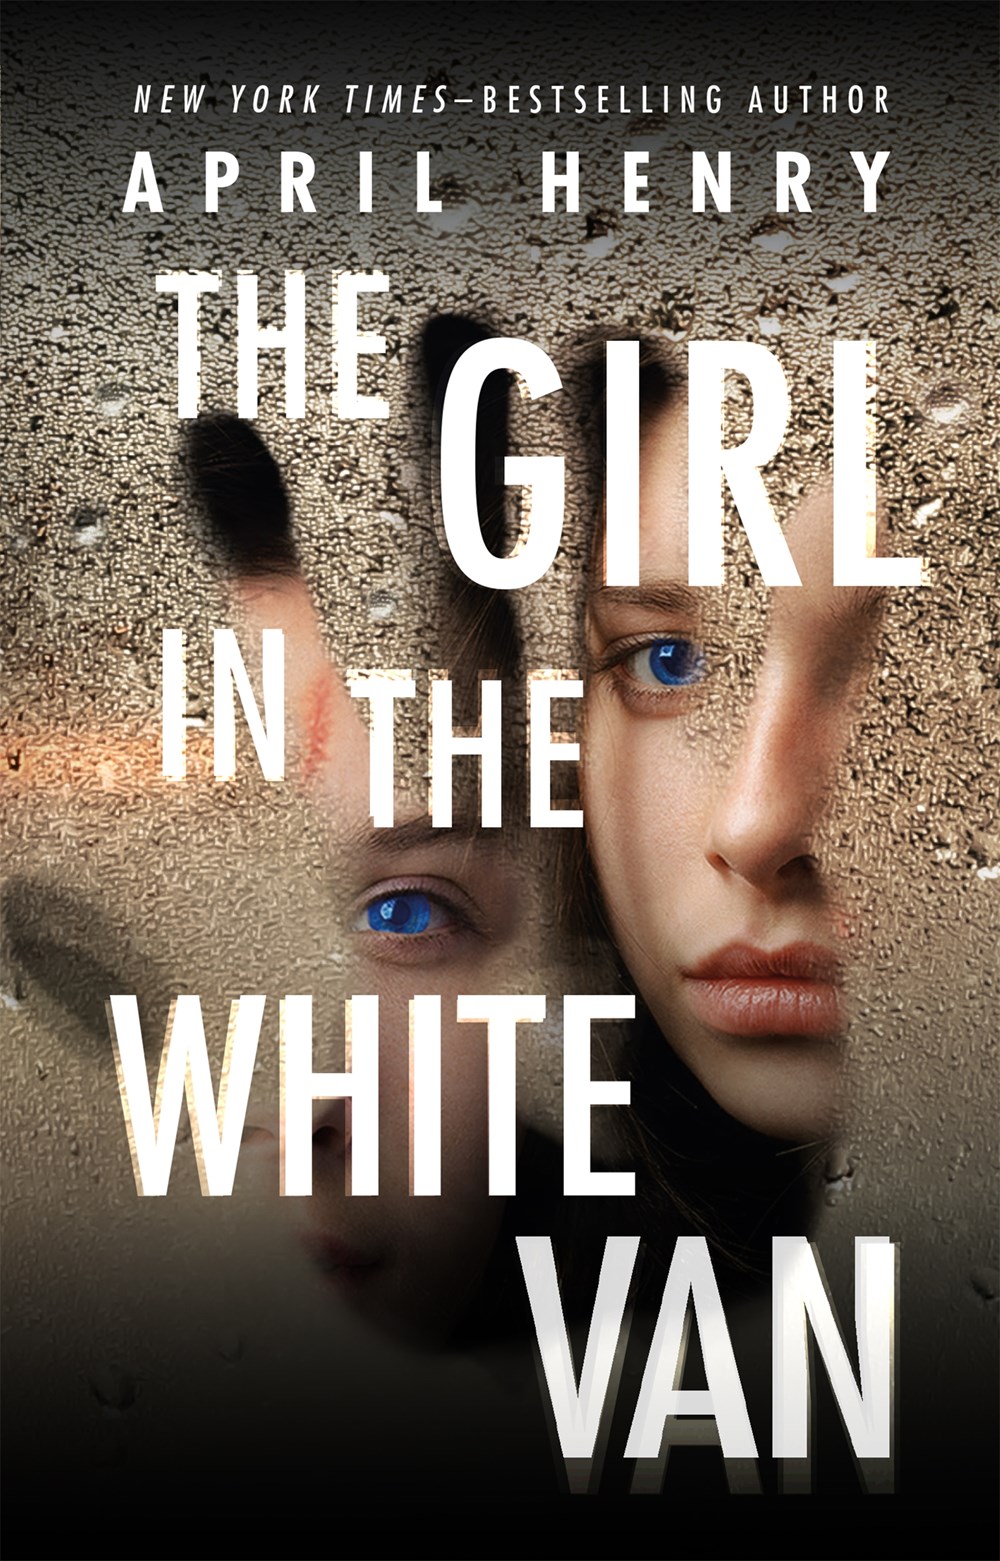 The girl in the white van book cover